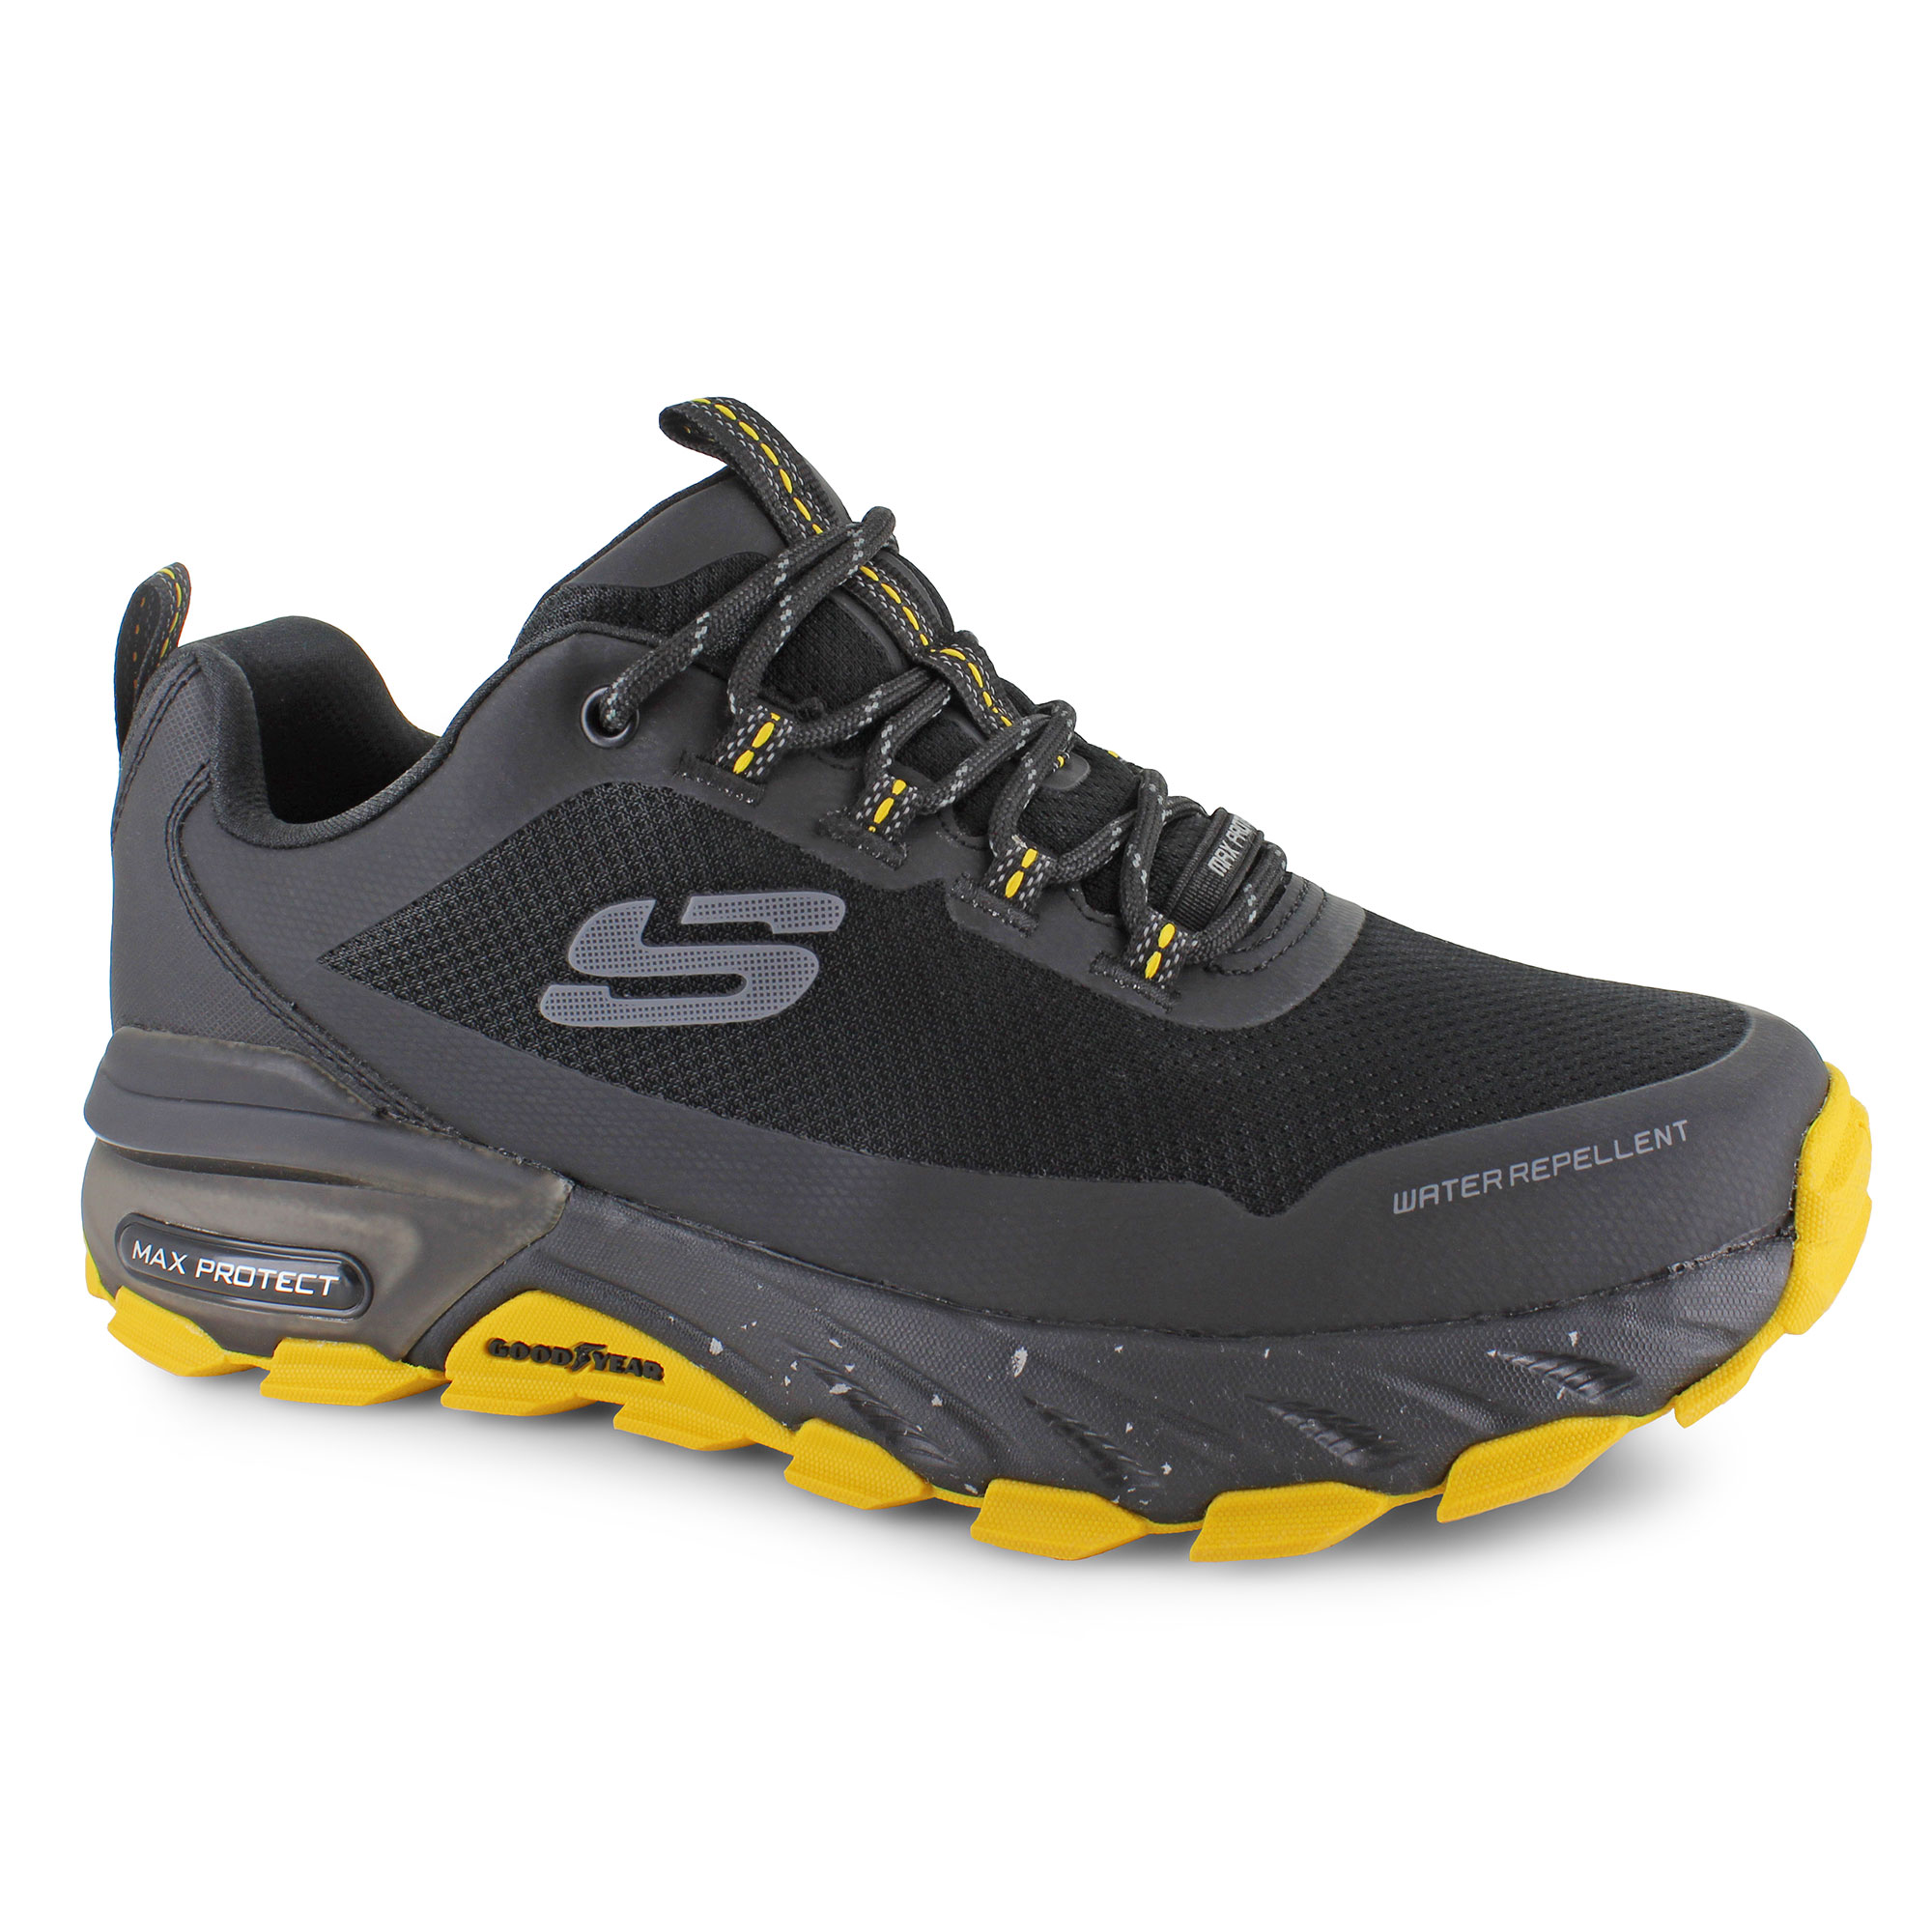 Skechers Max Protect - Liberated 237301